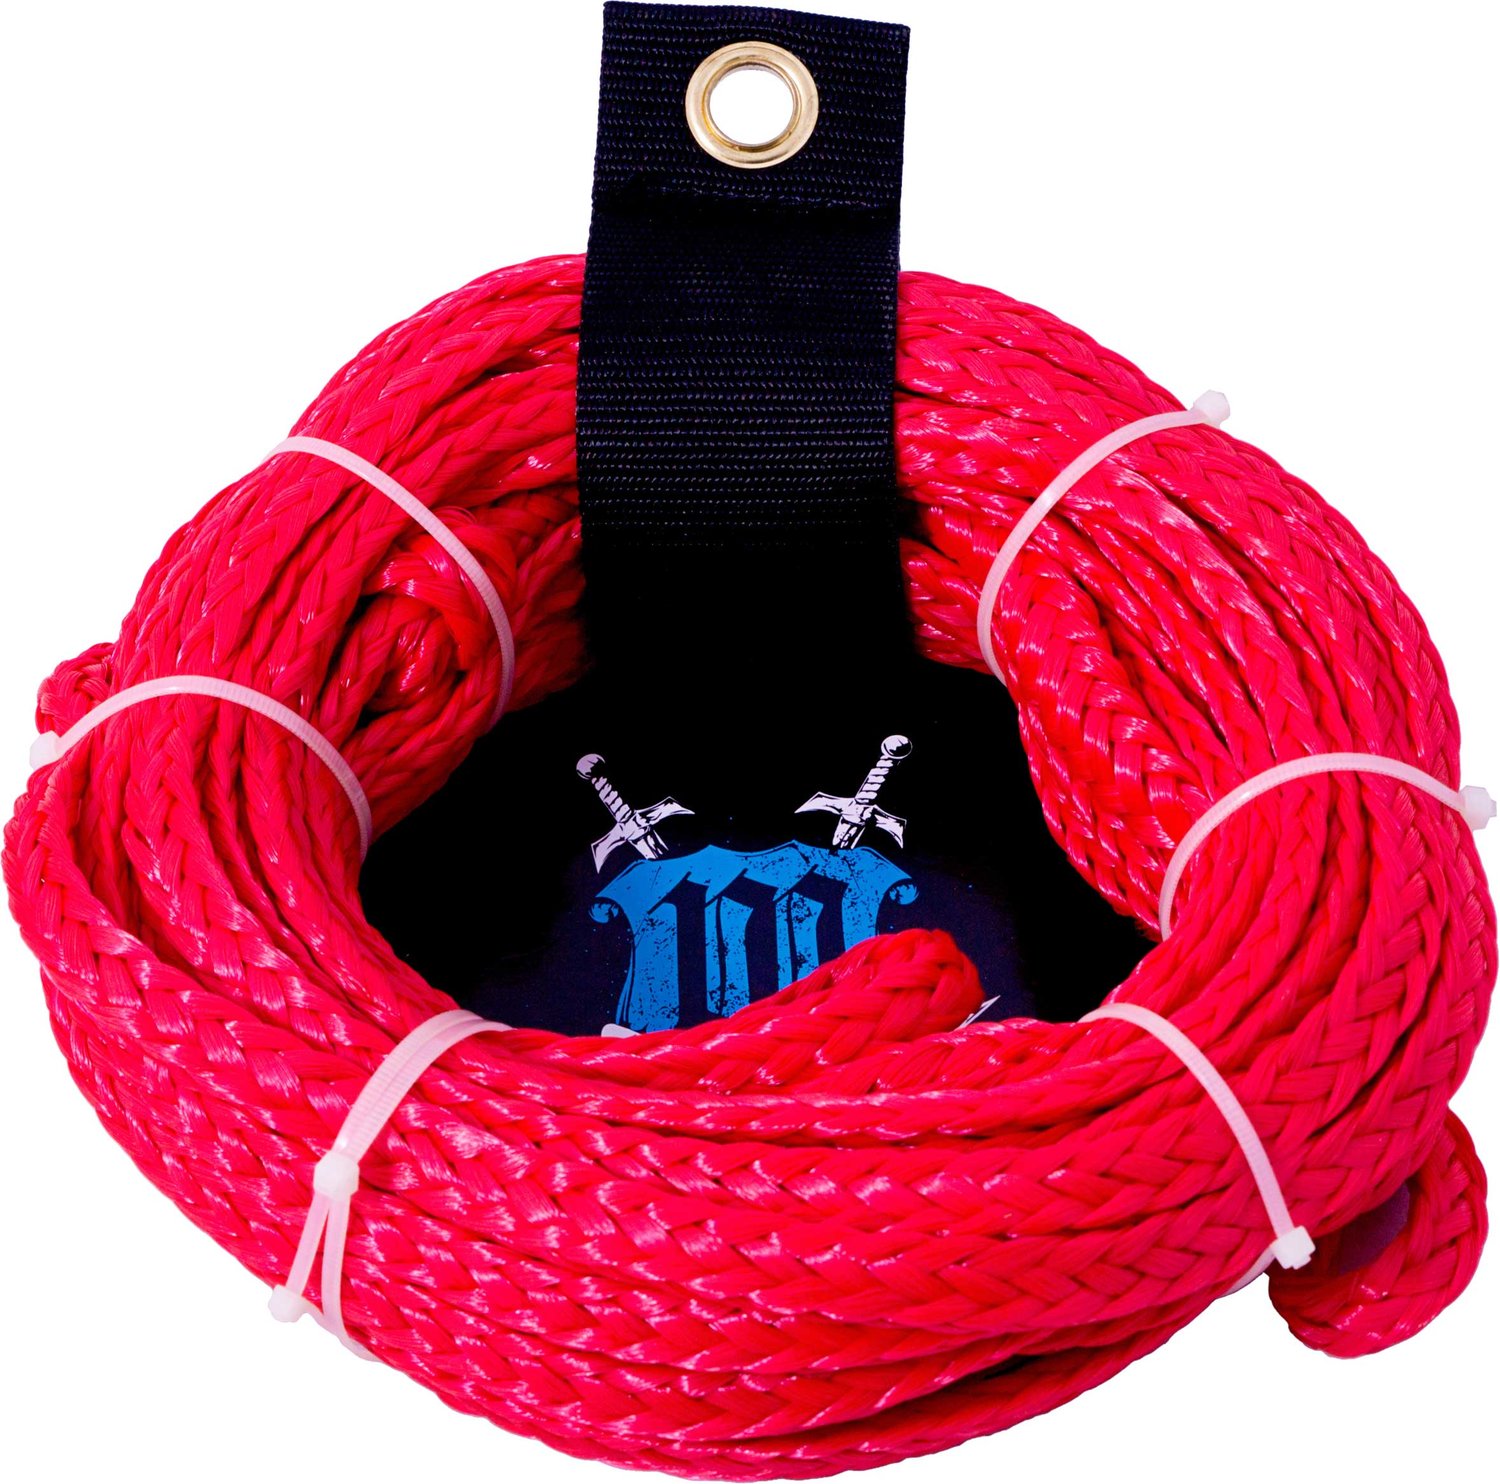 WILLIAMS 3-4 PERSON TUBE ROPE